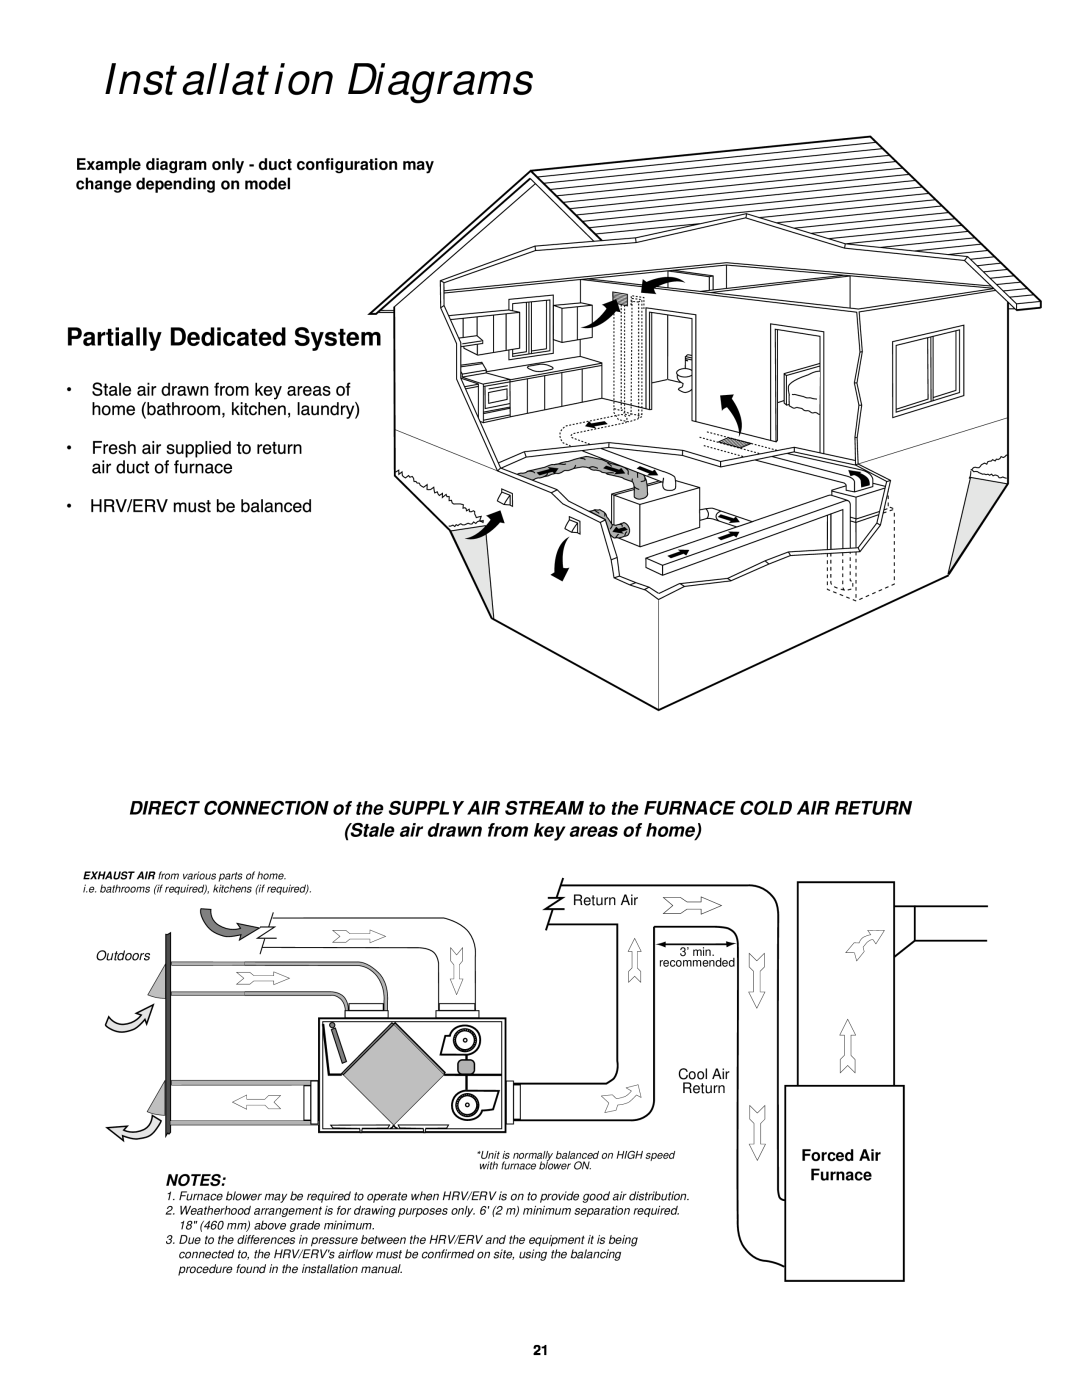 Lifebreath 200MAX Installation Diagrams, Partially Dedicated System, Stale air drawn from key areas of home, Outdoors 